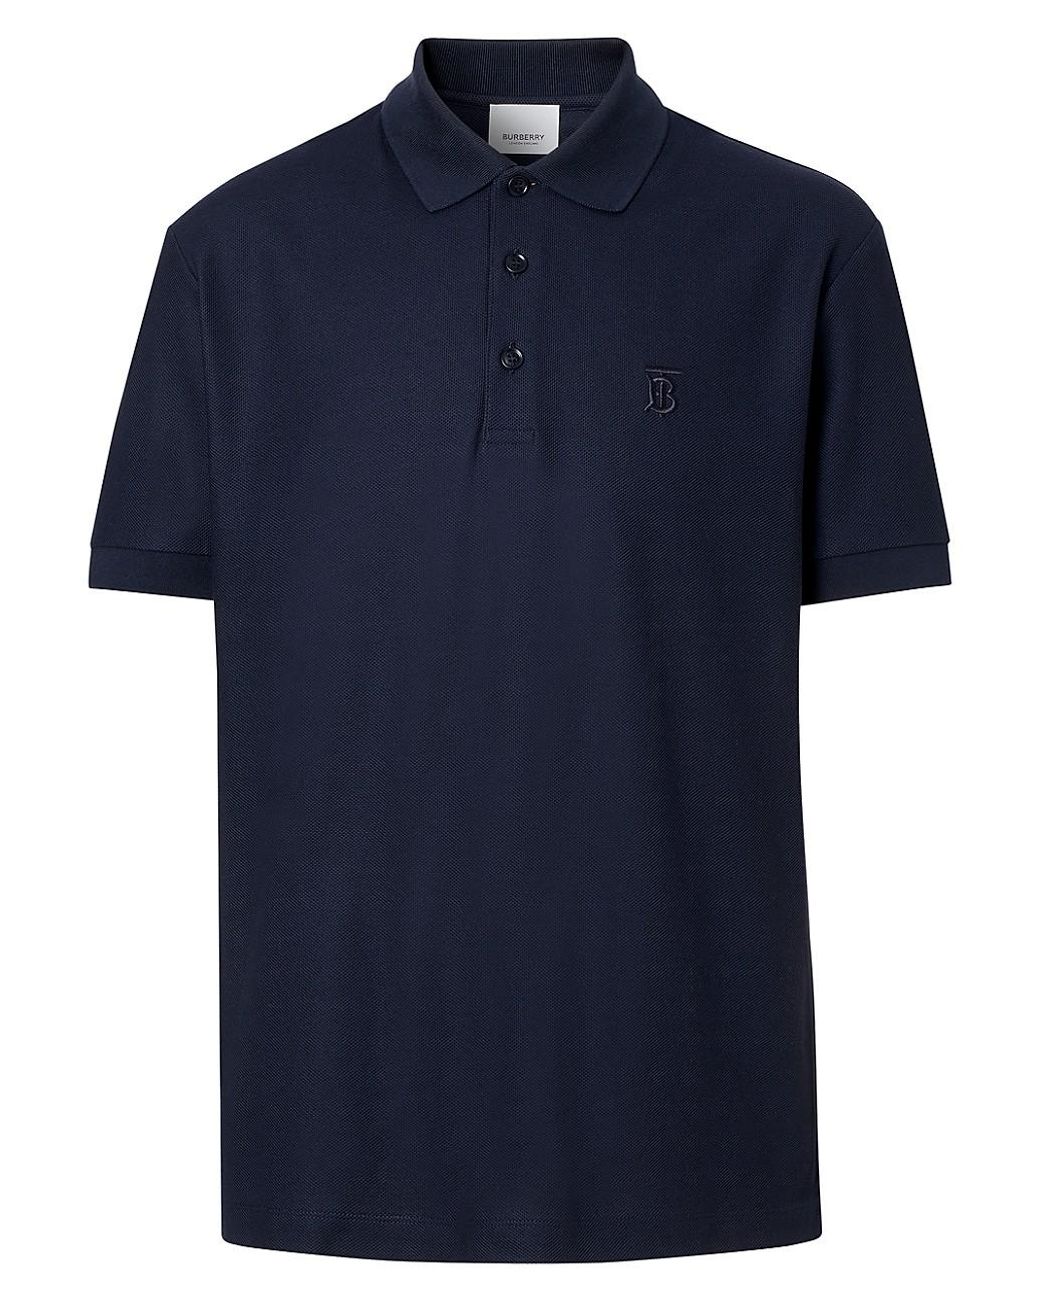 Burberry Cotton Eddie Core Polo Shirt in Navy (Blue) for Men - Lyst